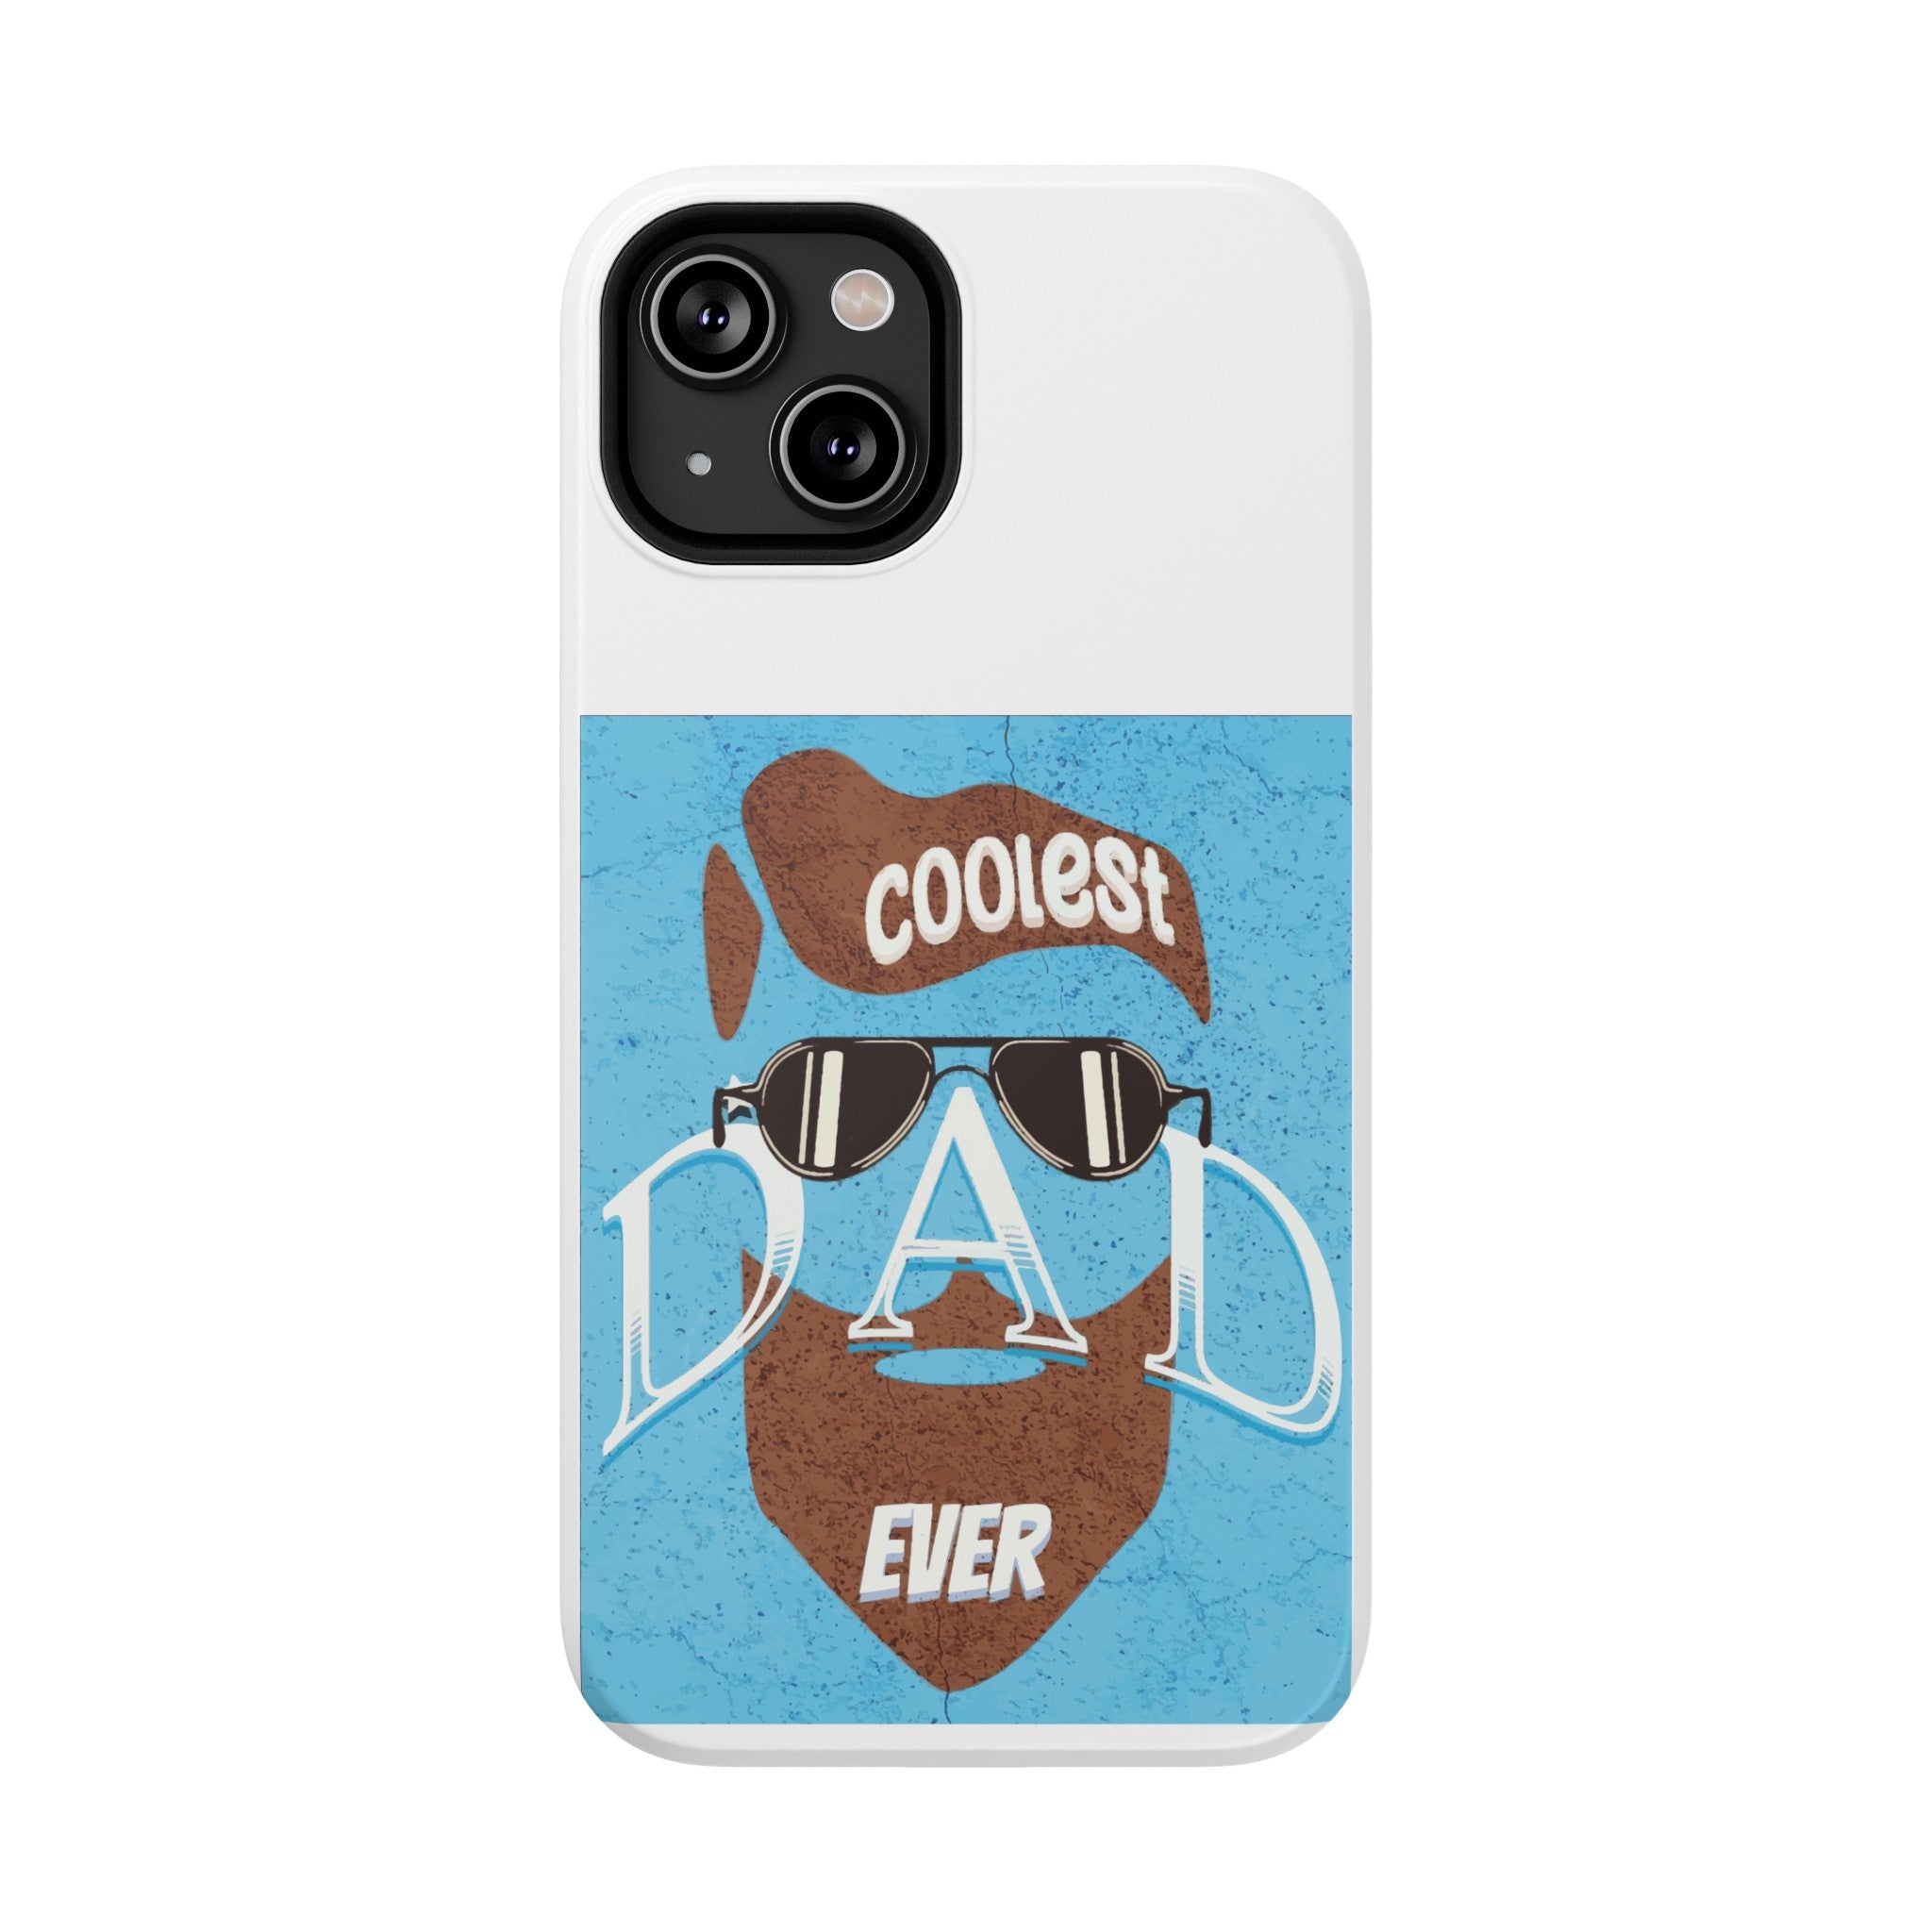 Coolest Dad Ever Impact-Resistant Phone Cases